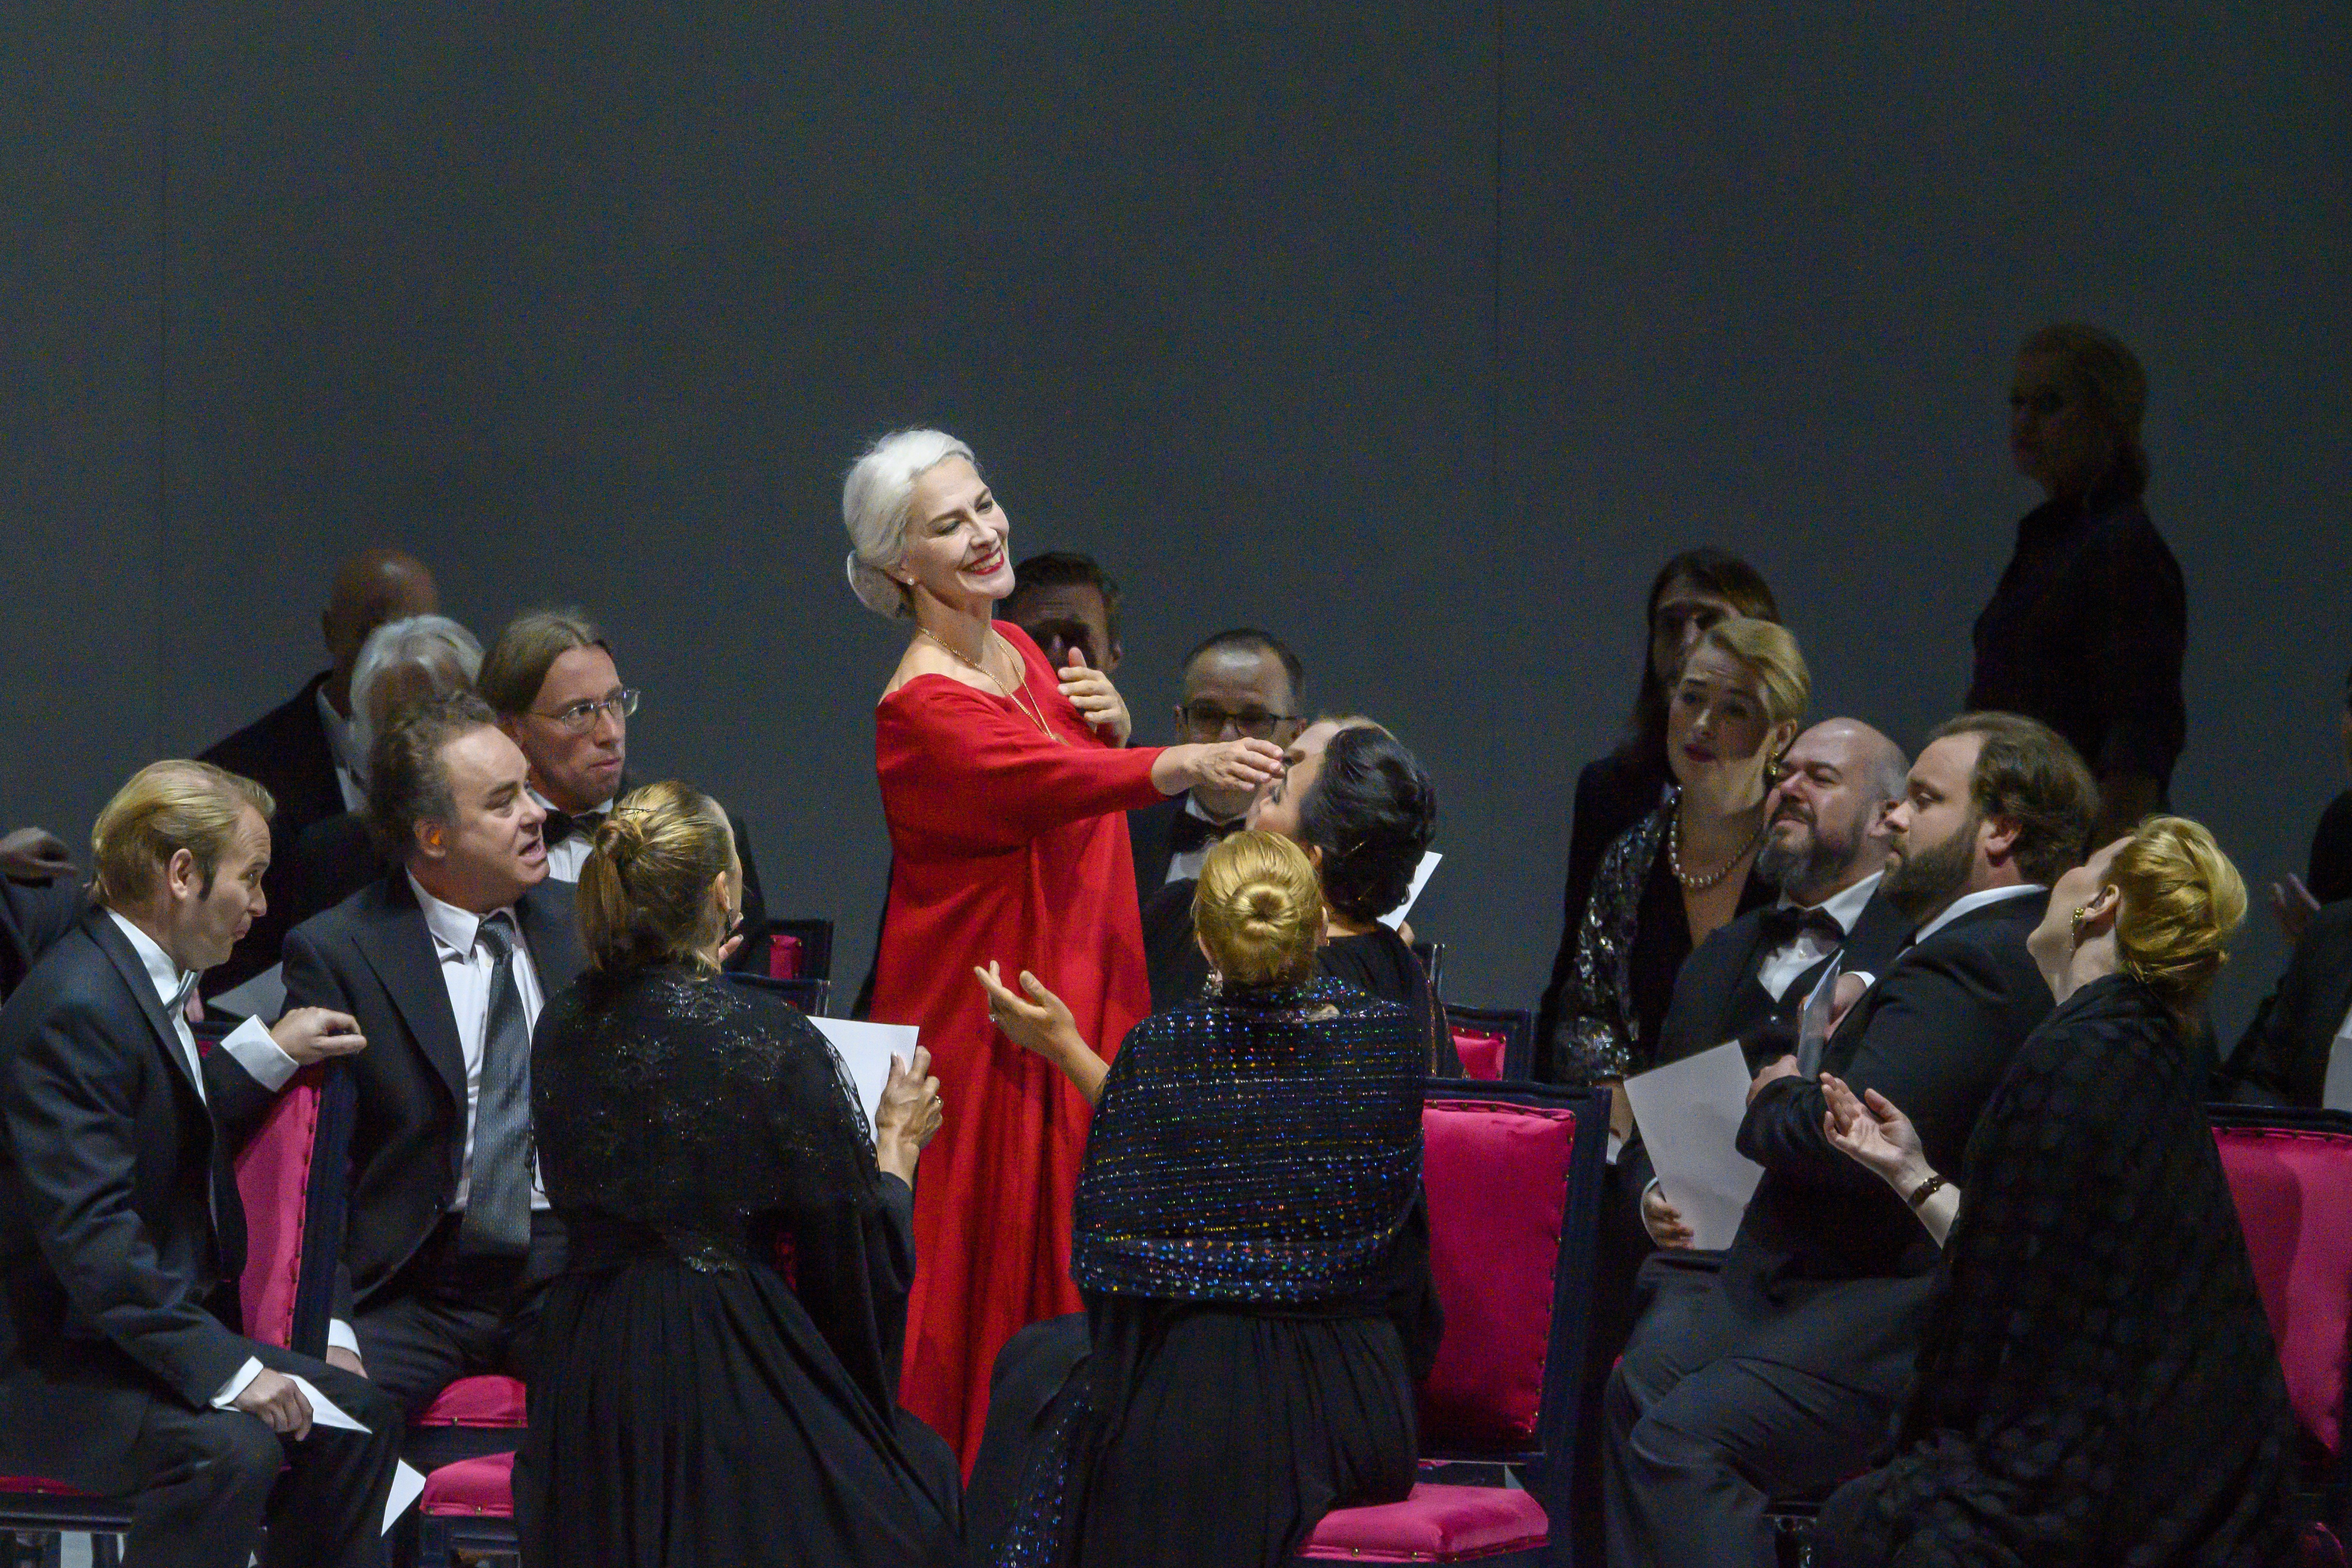 Charlotte Hellekant stars in Sebastian Fagerlund’s Autumn Sonata, part of the Hong Kong Leisure and Cultural Services Department’s World Cultures Festival, as a concert pianist visiting her daughters after a seven-year absence. Photo: Leisure and Cultural Services Department